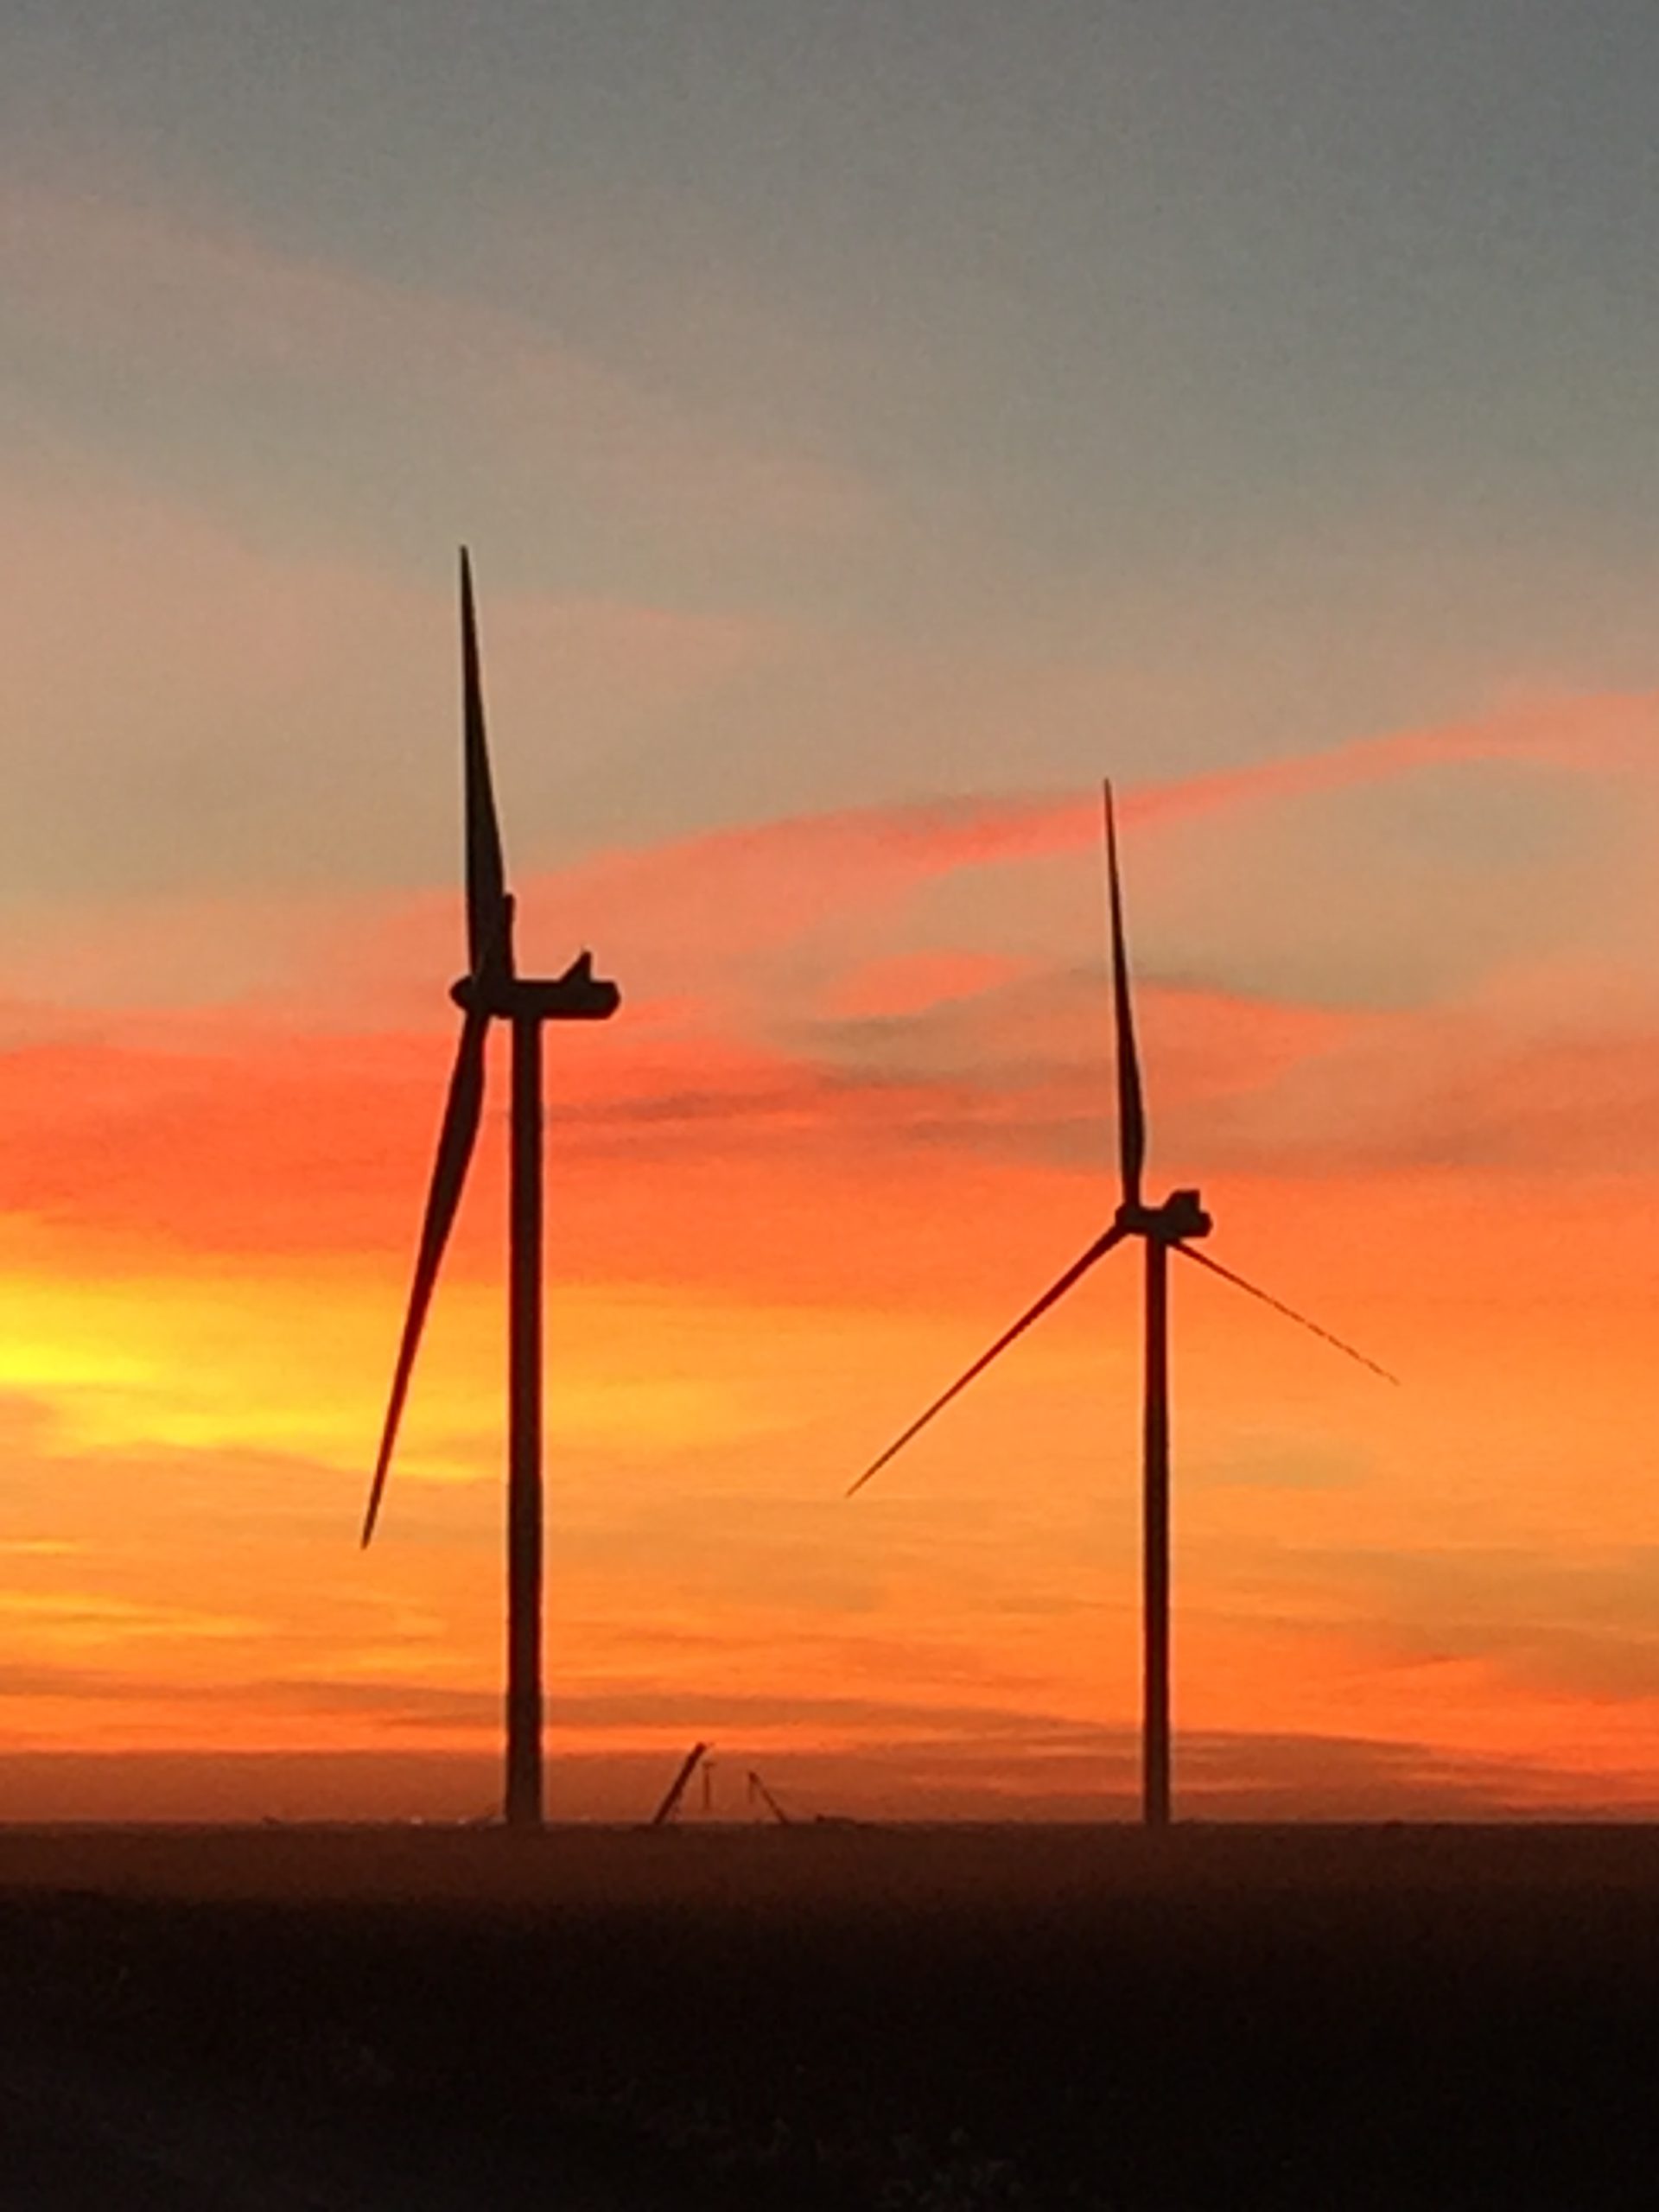 Sunset with two wind turbines